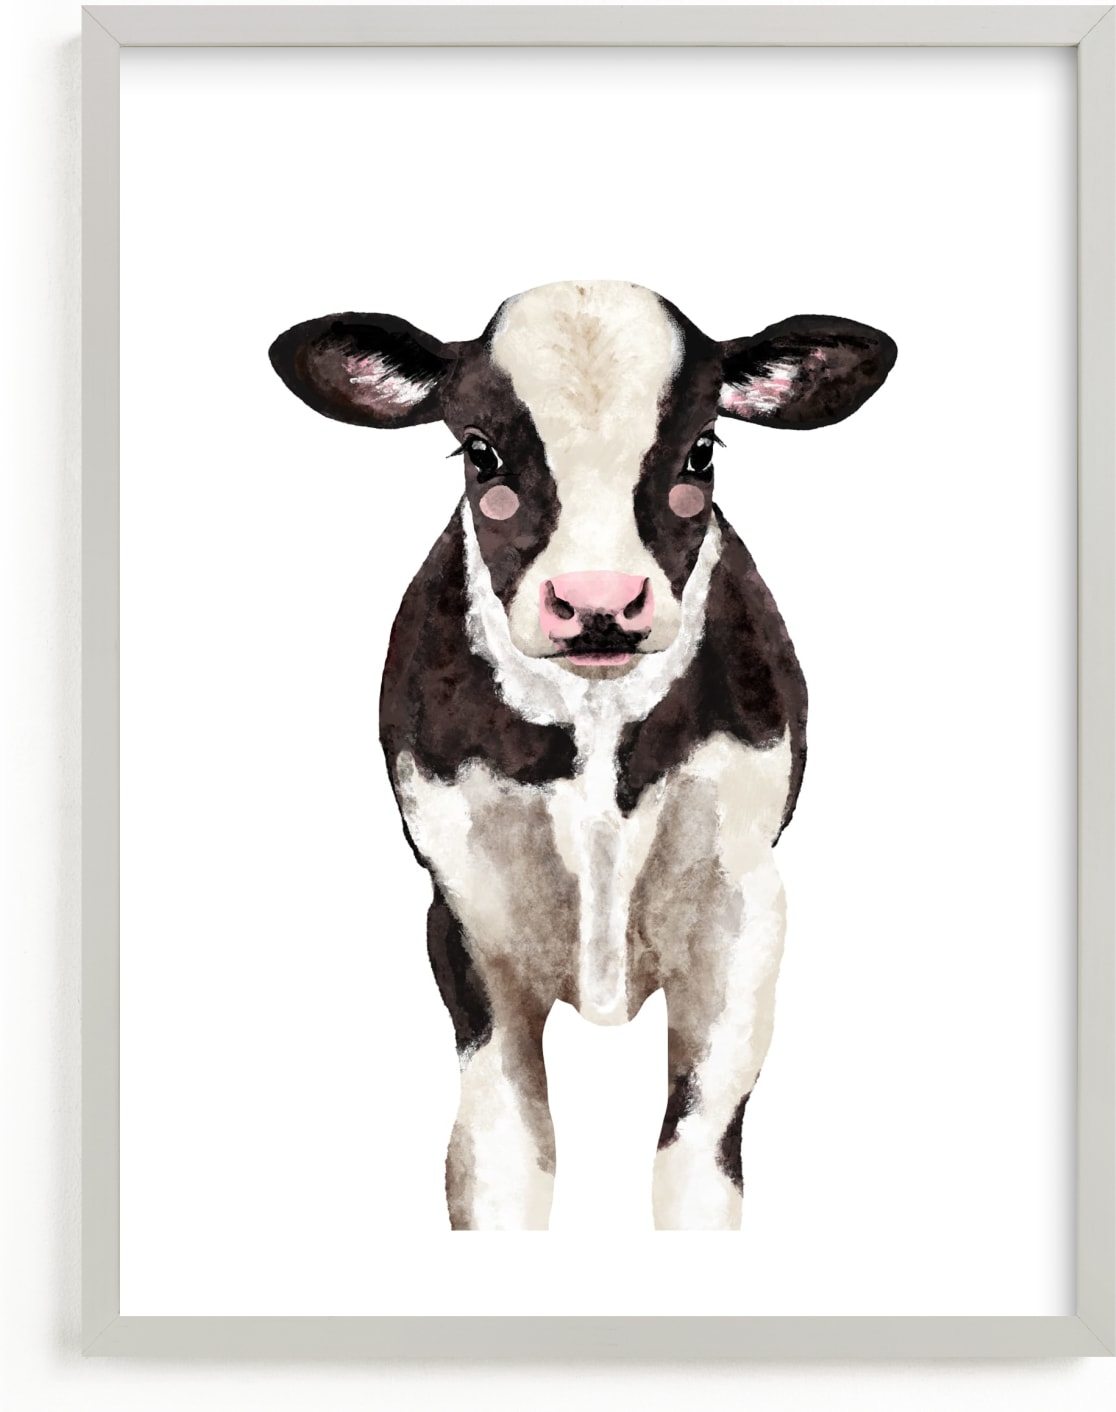 This is a white art by Cass Loh called Baby Animal Ox.